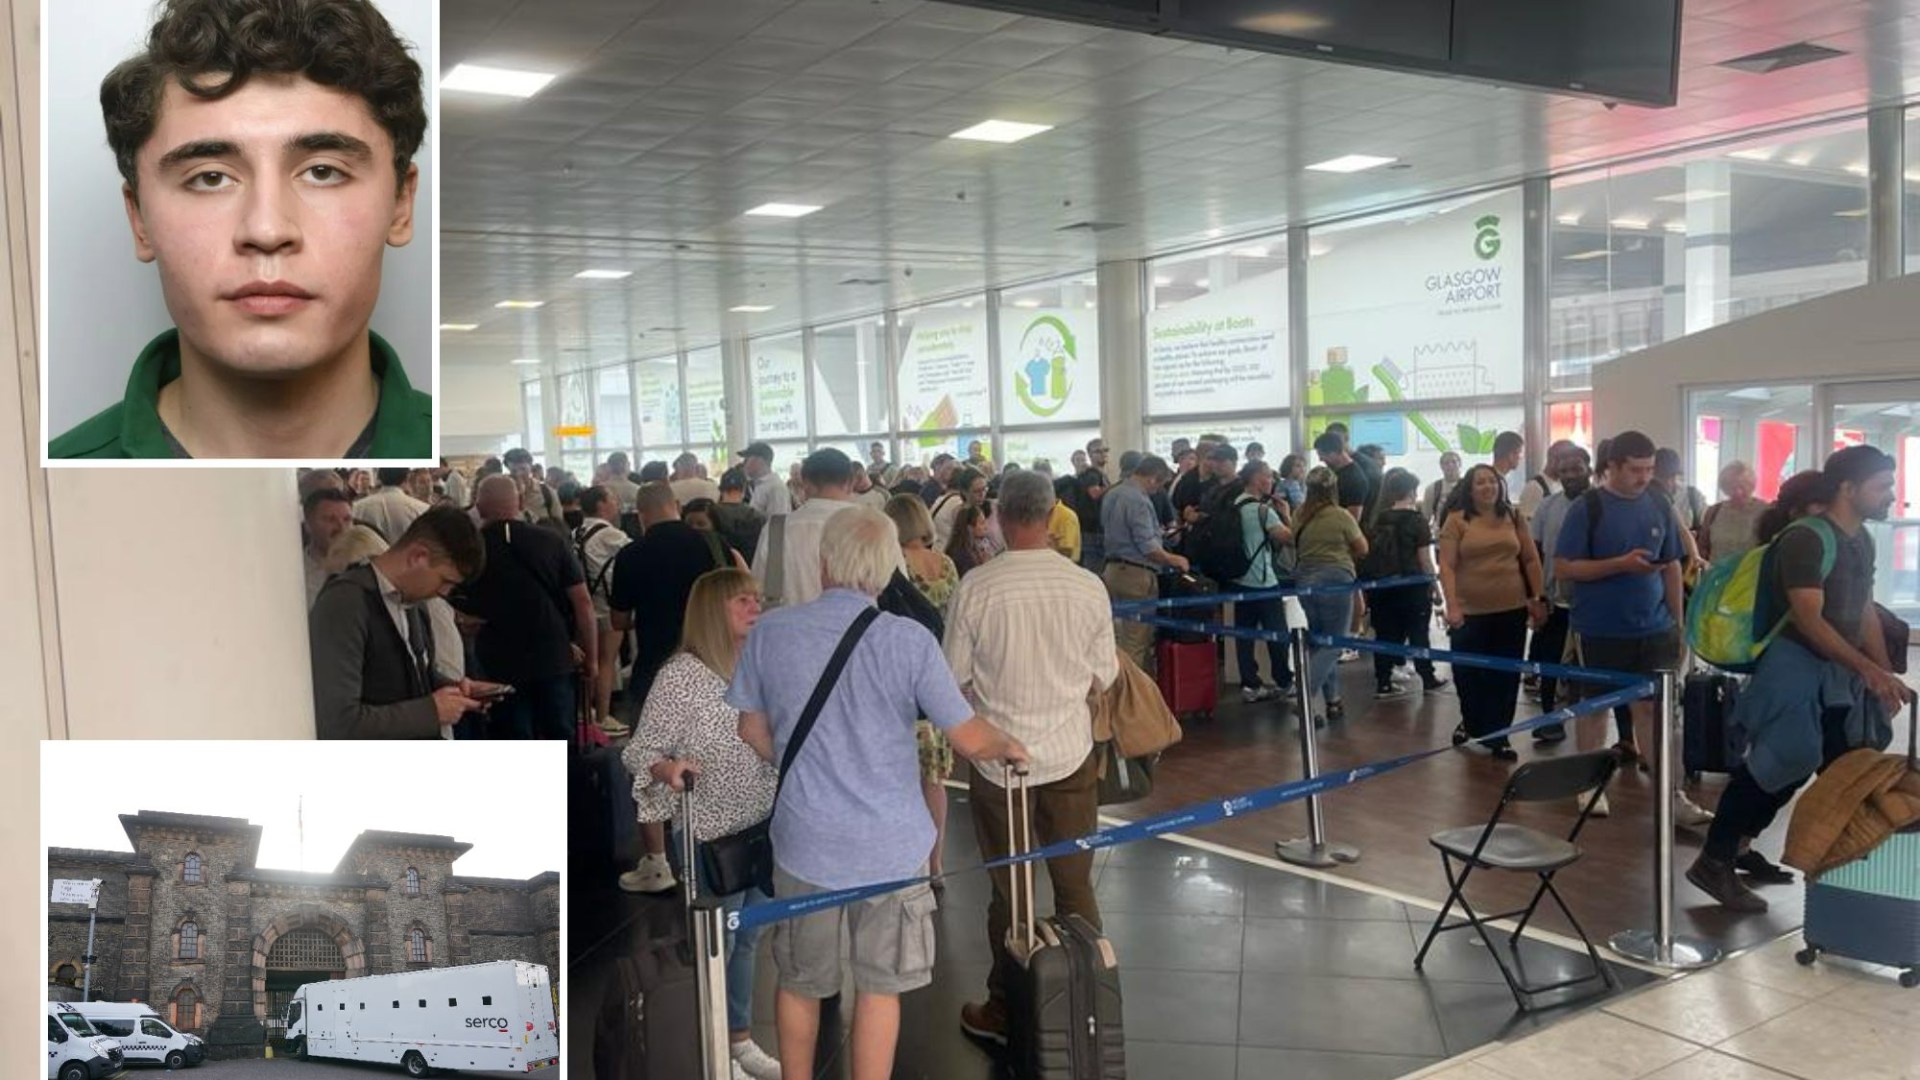 Travellers face chaos as UK airports are put on alert to find suspected terrorist Daniel Khalife after he escaped prison